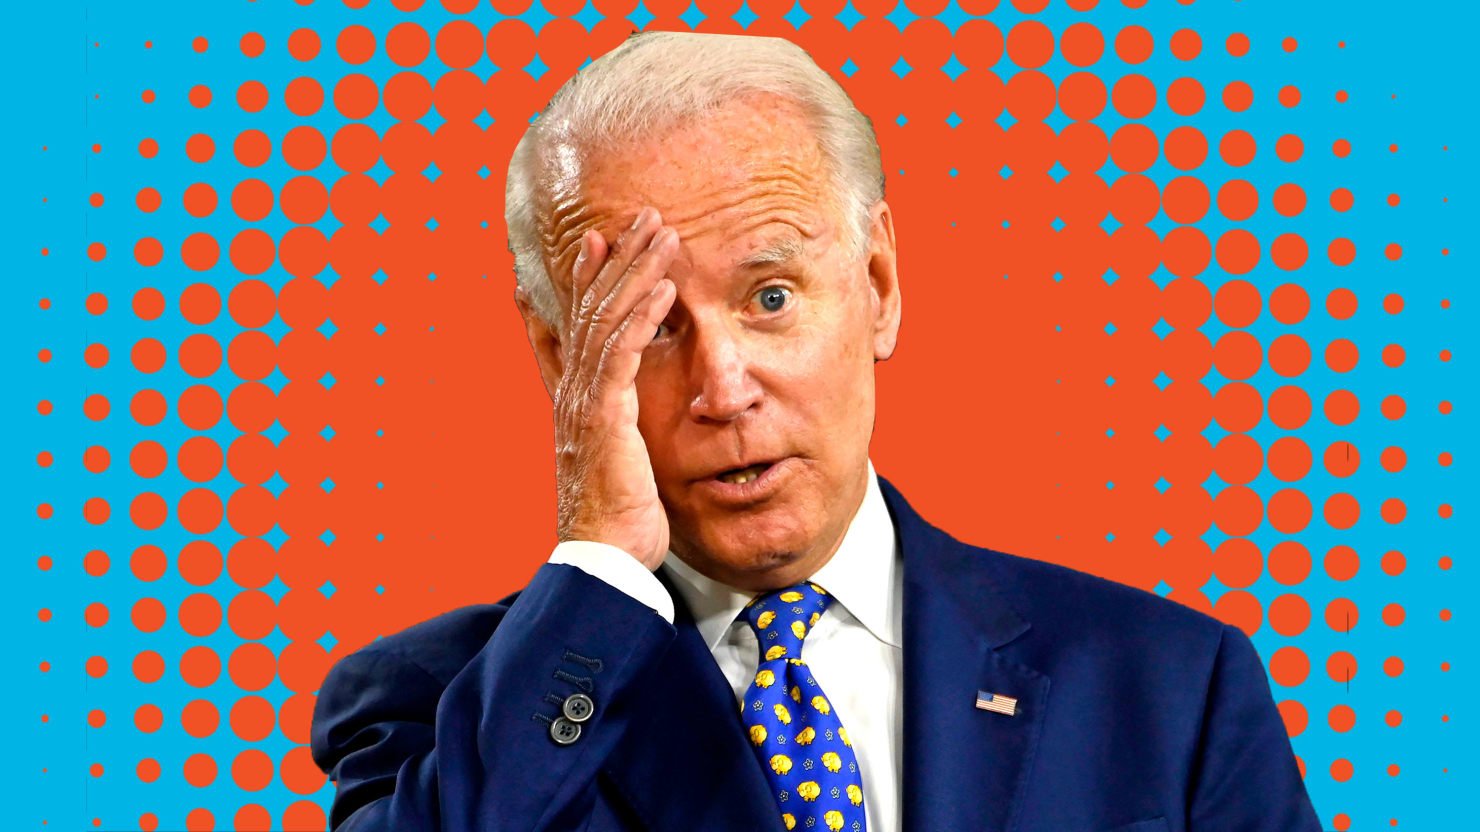 Biden Hits Back Against Trump’s ‘But His Emails’ Attack: ‘The Guy Who Got in Trouble in Ukraine Was This Guy’